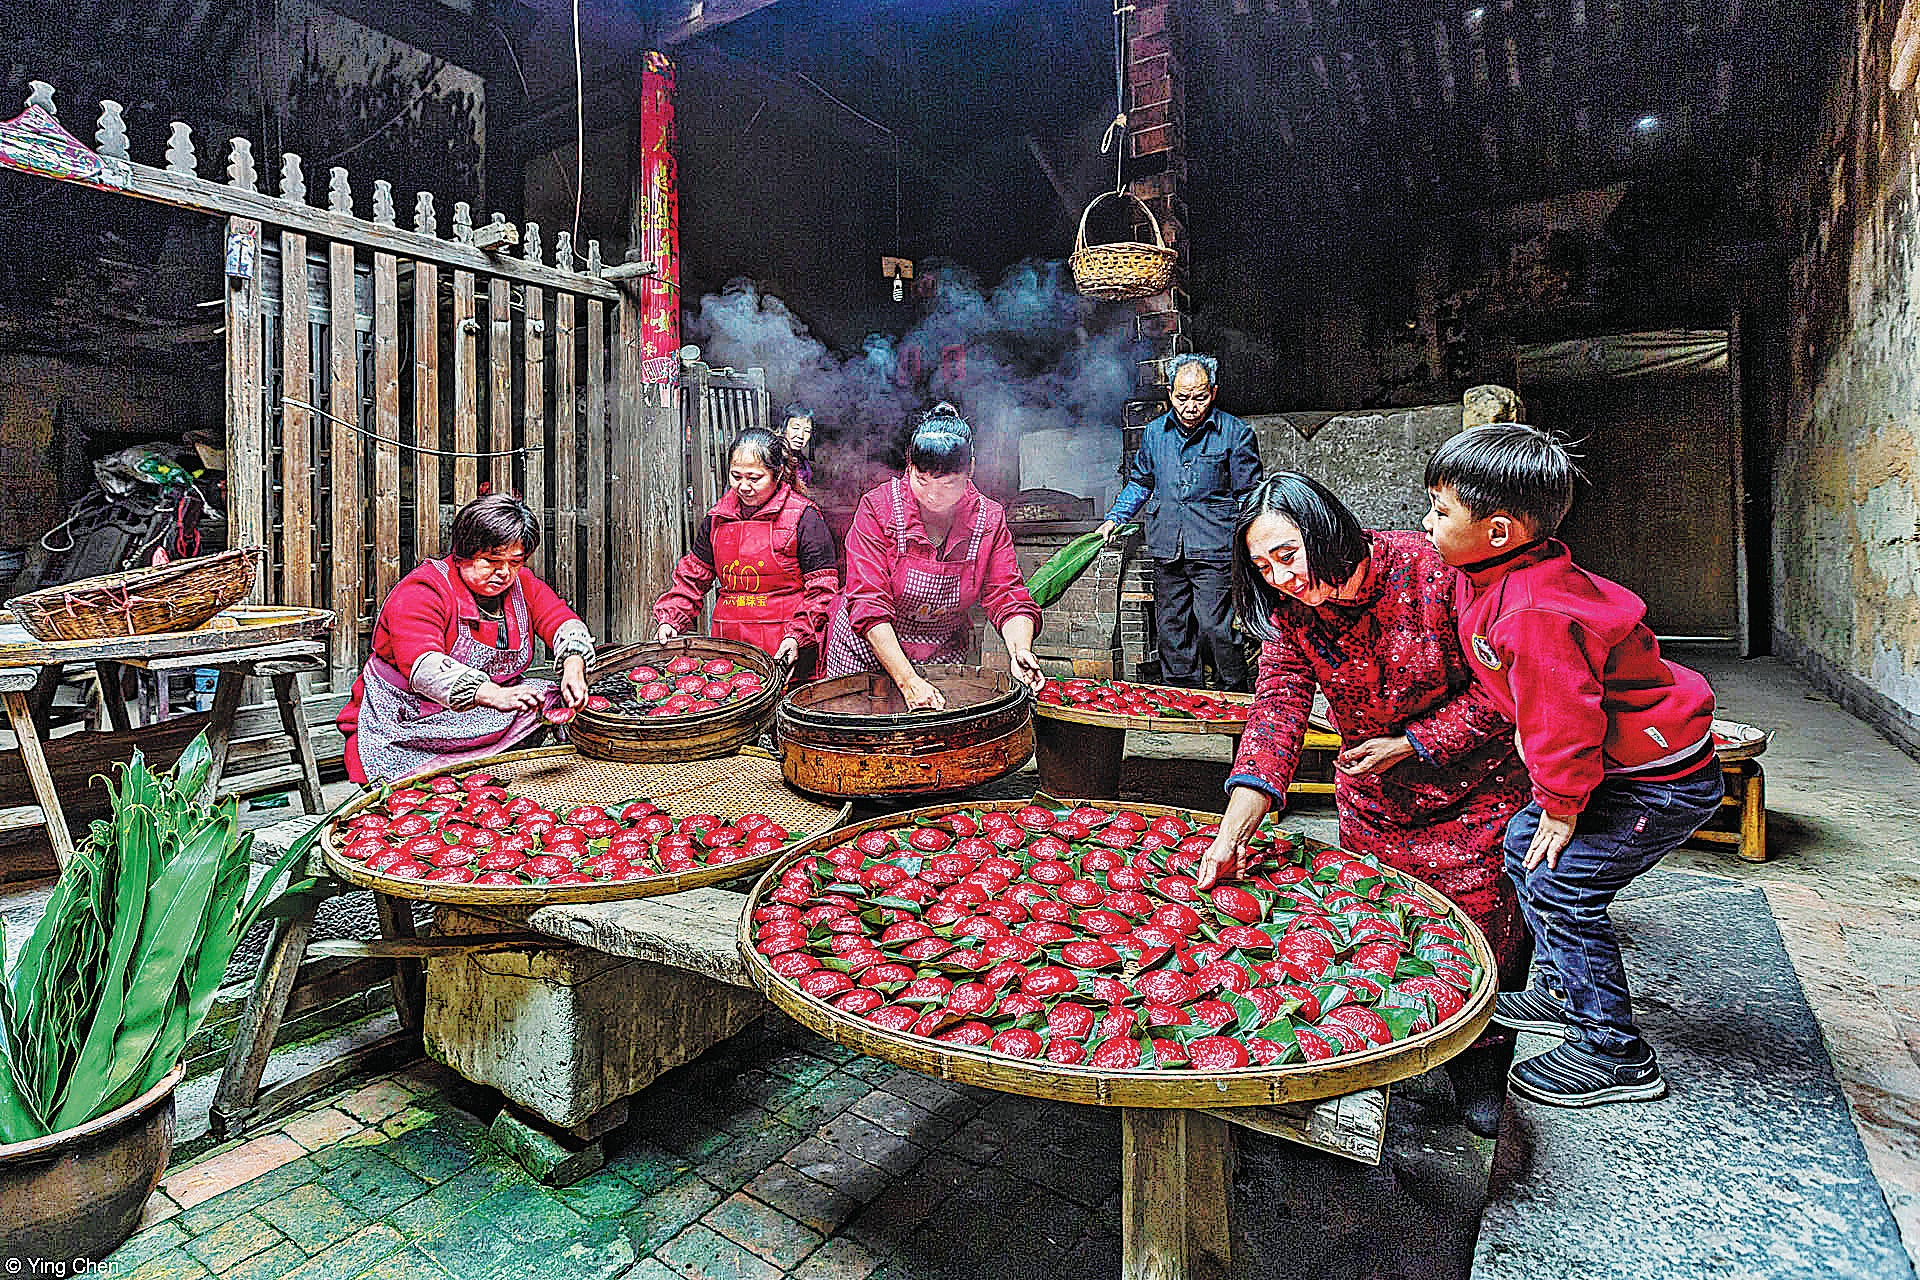 Chen Ying’s picture, Traditional Skill, won the Food for Celebration category with its depiction of a family in China’s Fujian province making traditional food for Chinese New Year